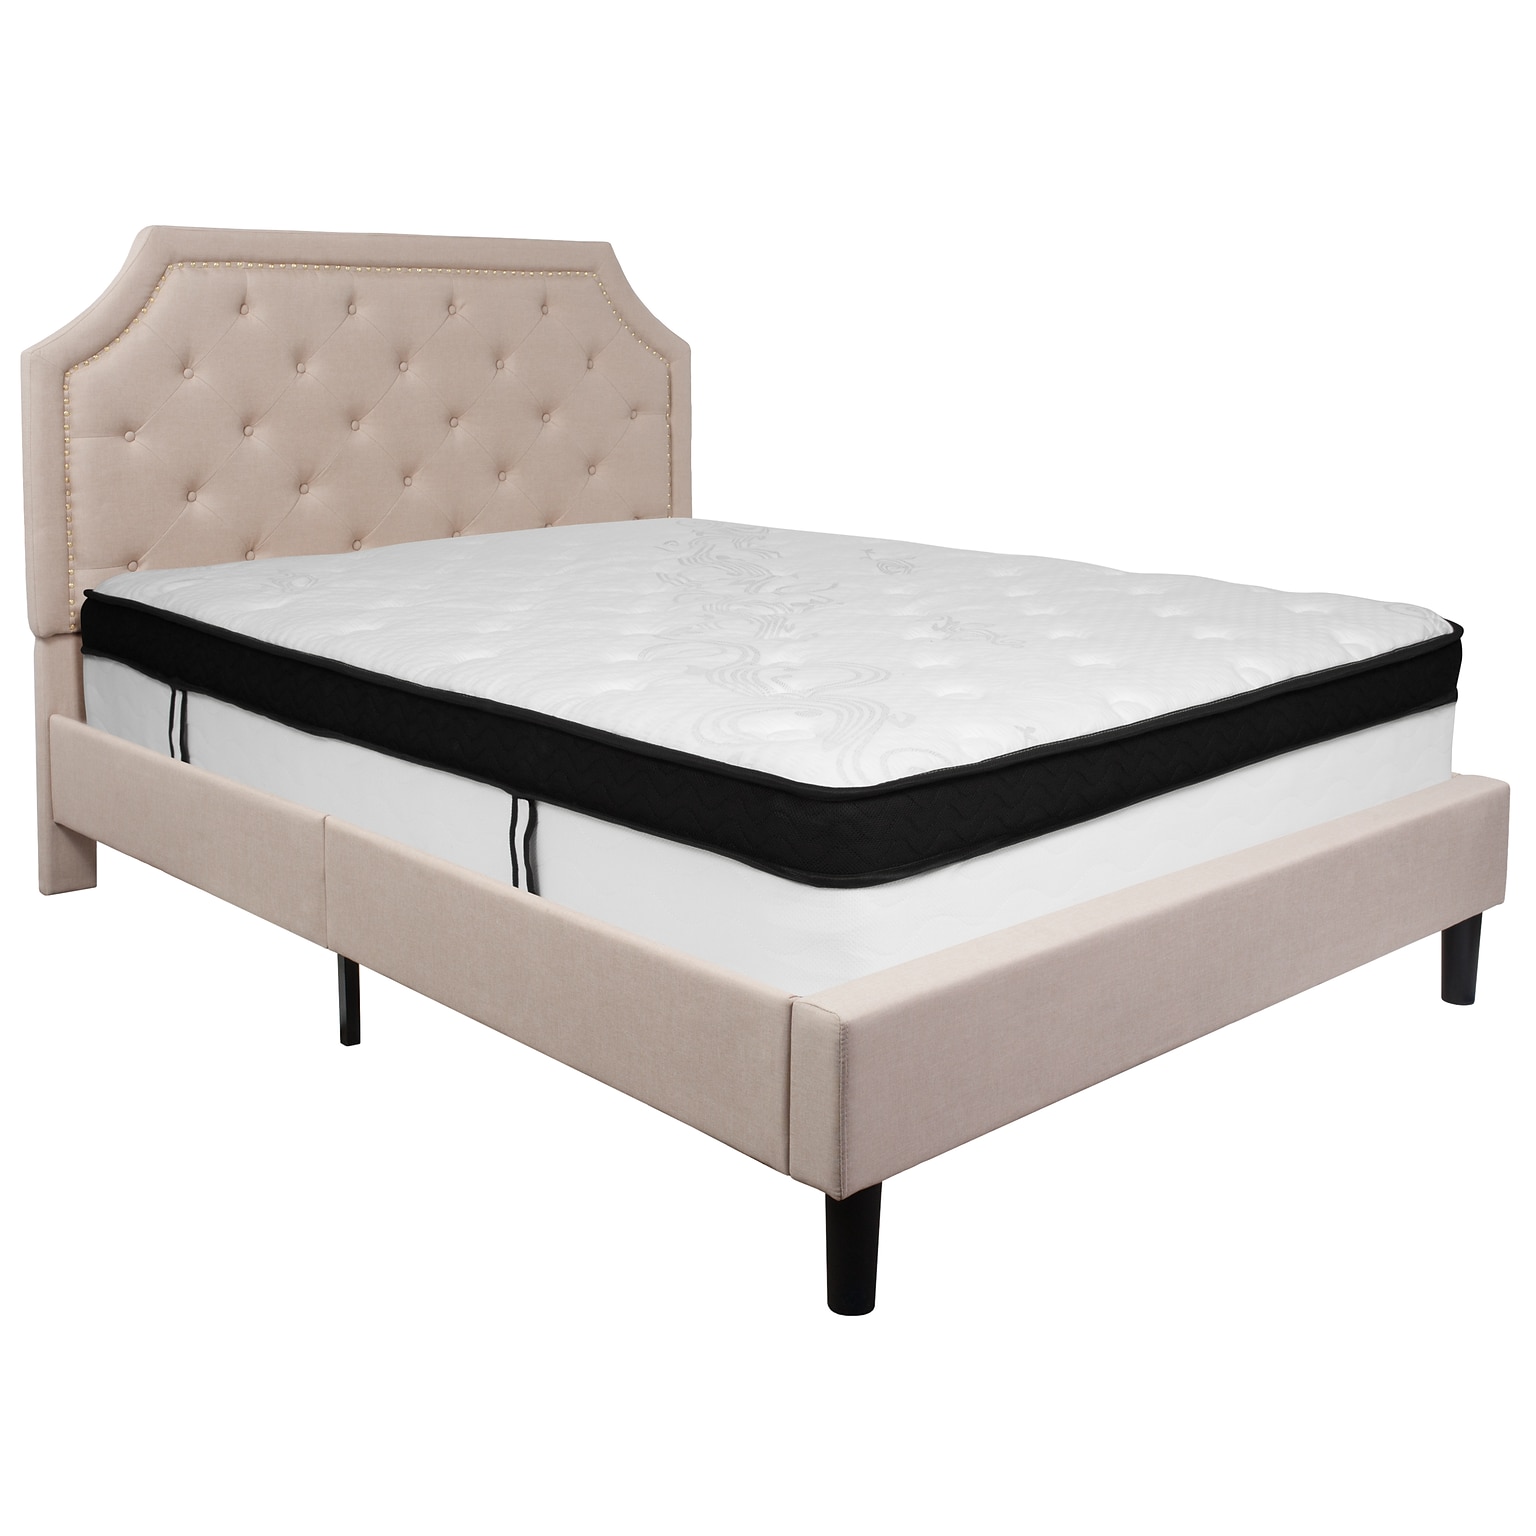 Flash Furniture Brighton Tufted Upholstered Platform Bed in Beige Fabric with Memory Foam Mattress, Queen (SLBMF3)